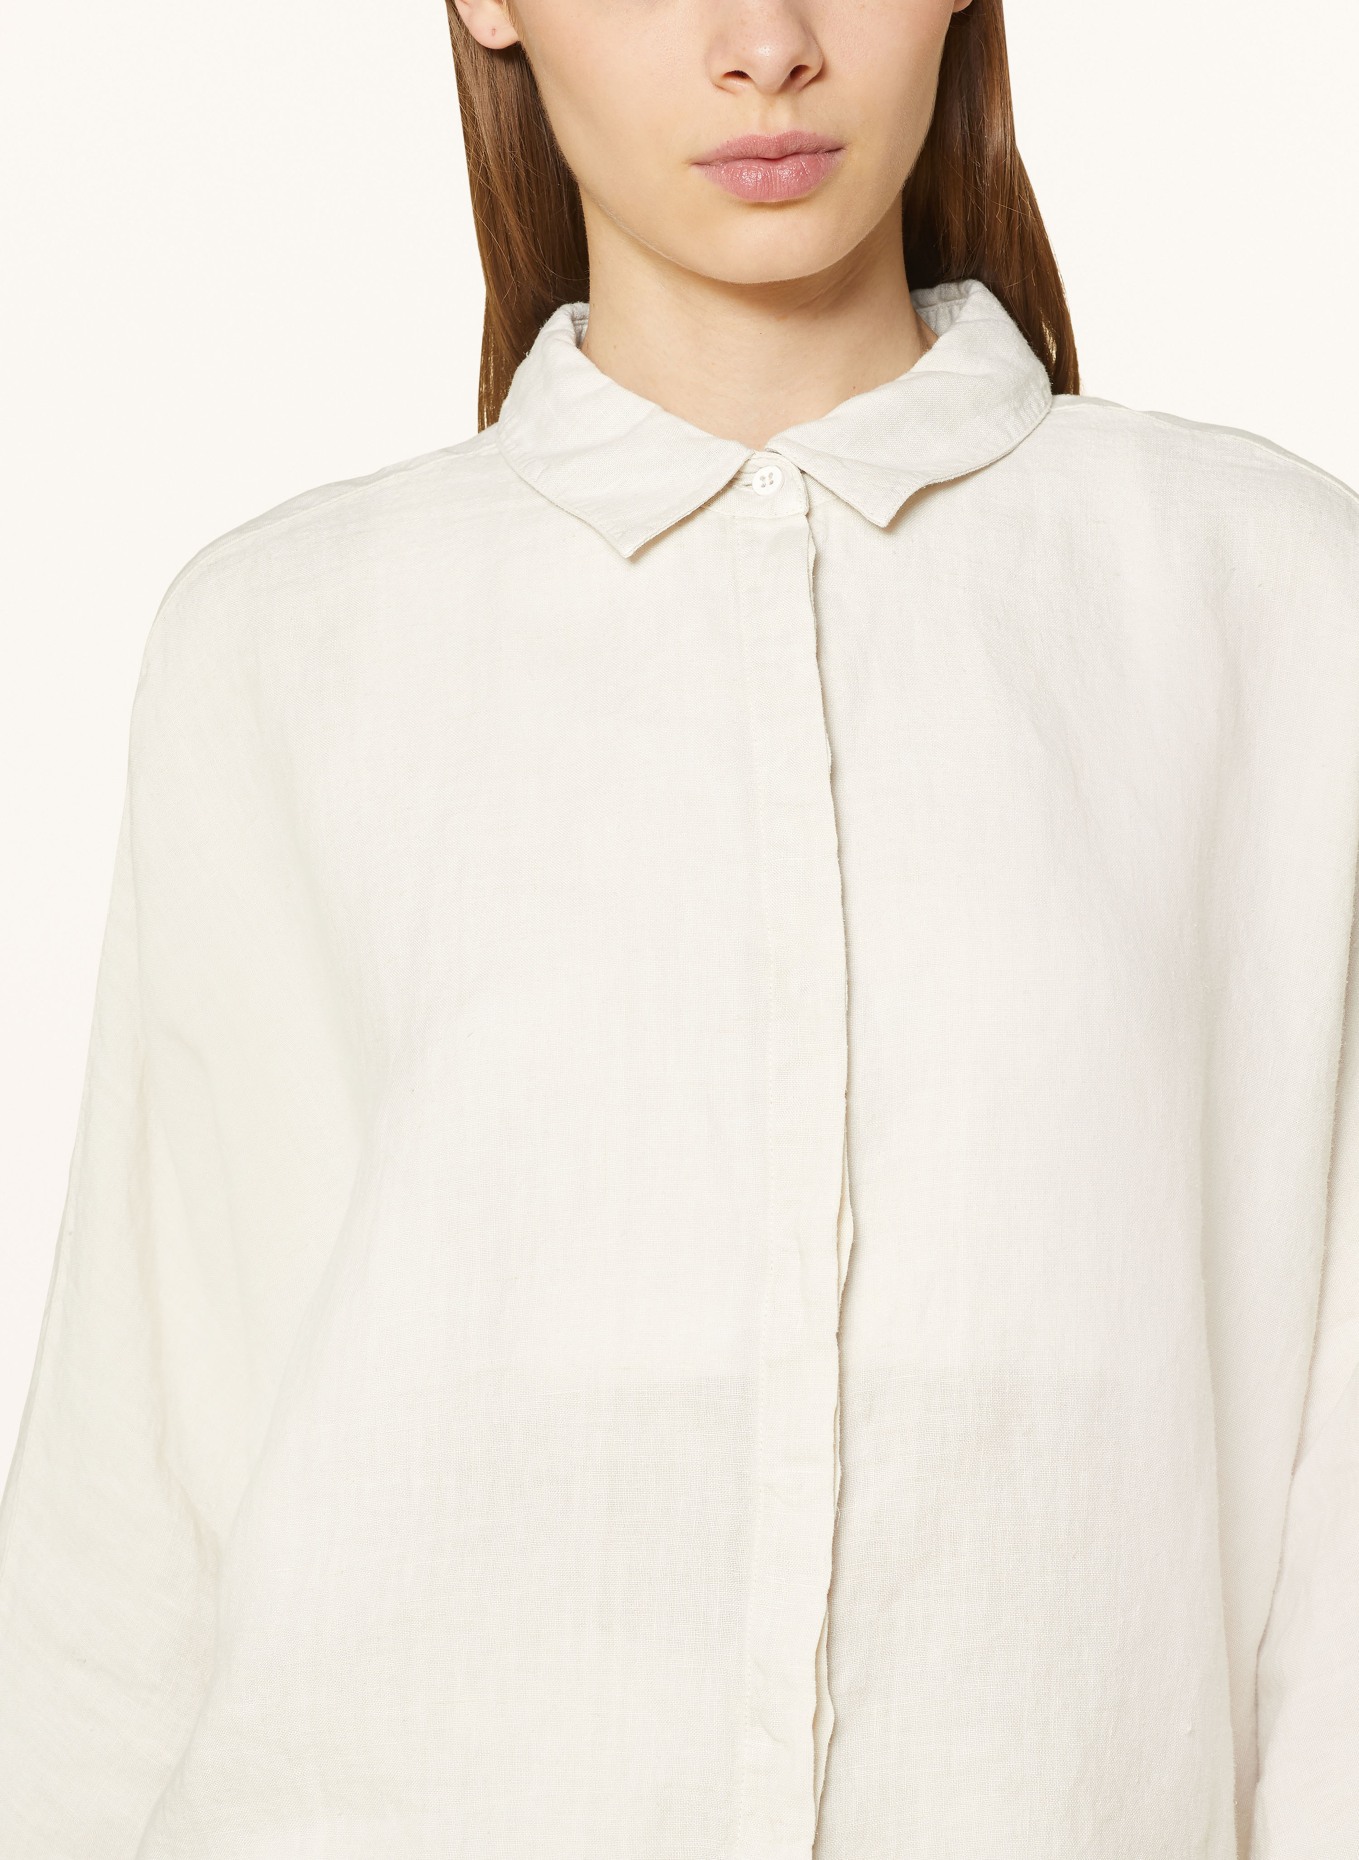 oui Linen blouse with 3/4 sleeves, Color: ECRU (Image 4)